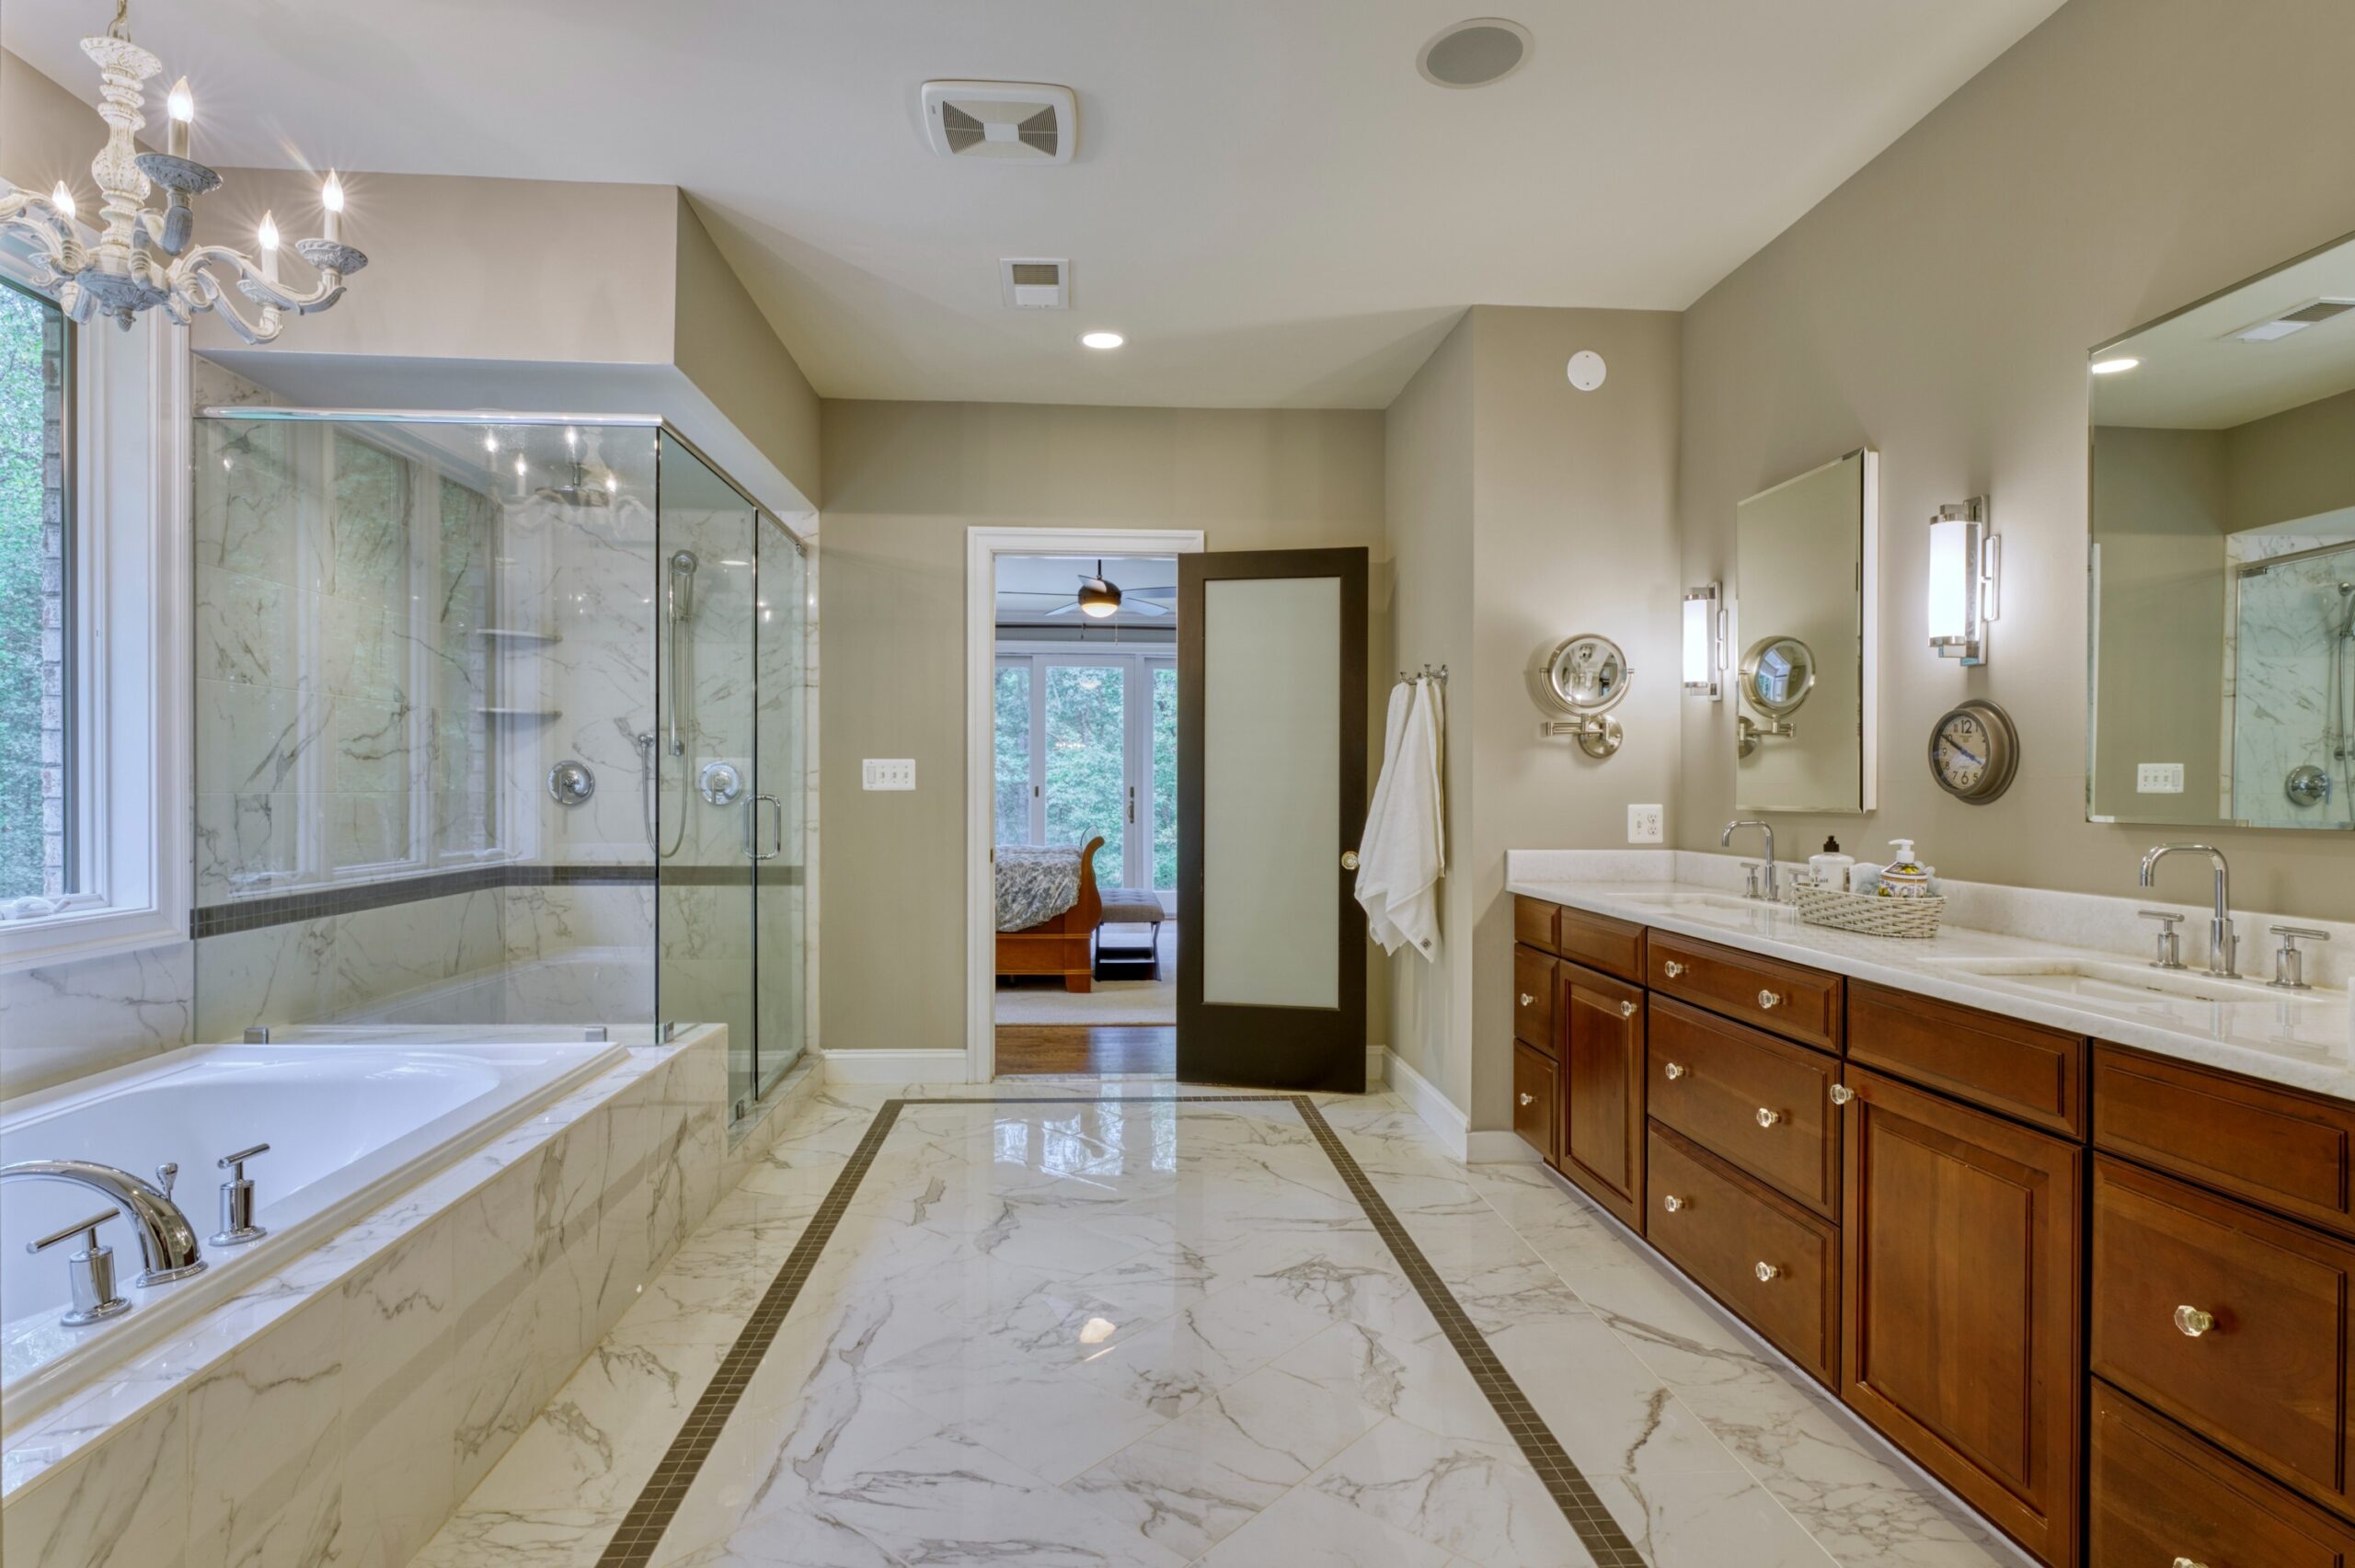 Professional interior photo of 40046 Mount Gilead Rd in Leesburg, Virginia - showing the primary bathroom for the main floor bedroom with marble floor, looking back towards the bedroom with expansive dual vanity on the right and a soaking tub next to a walk in enclosed shower on the left side.